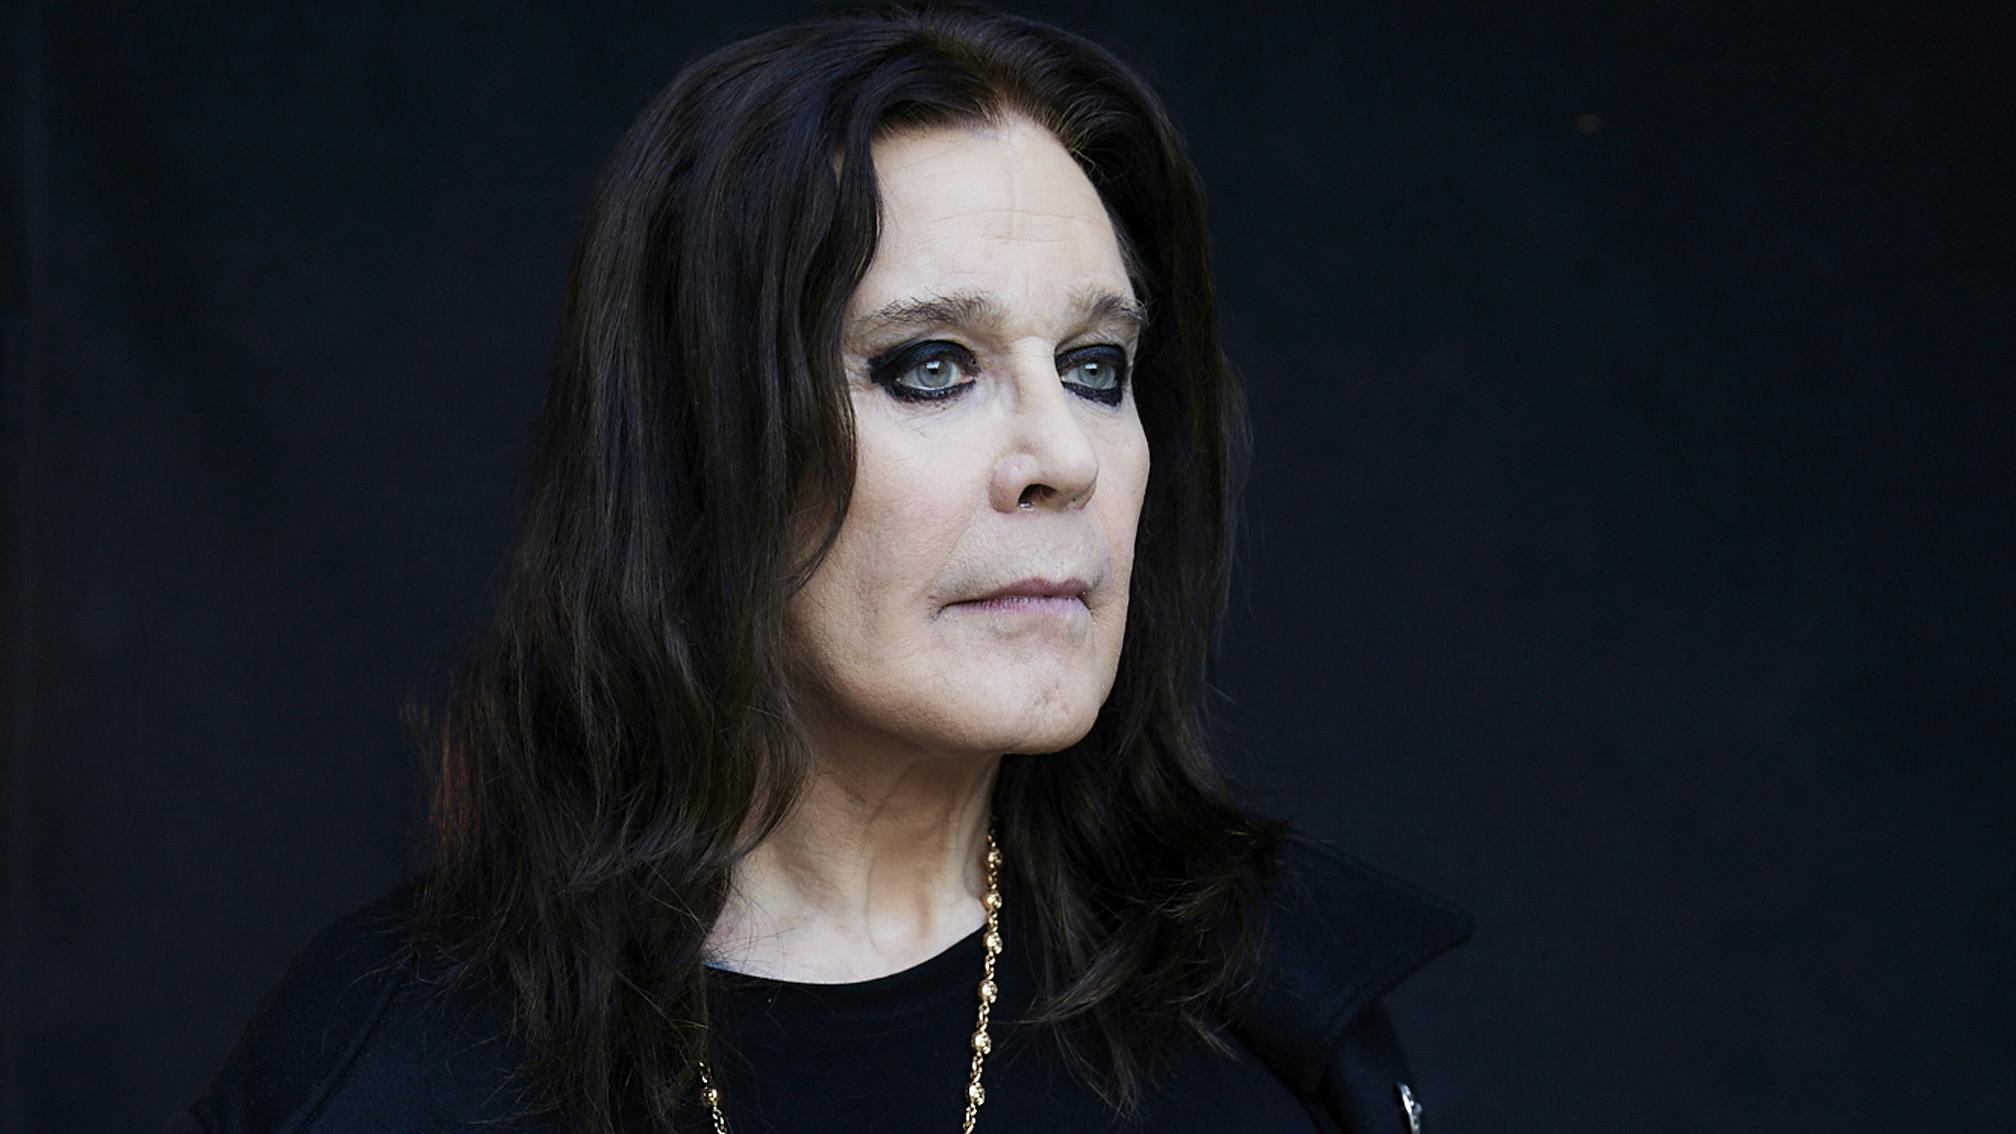 Ozzy Osbourne Was First Diagnosed With Parkinson's In 2003